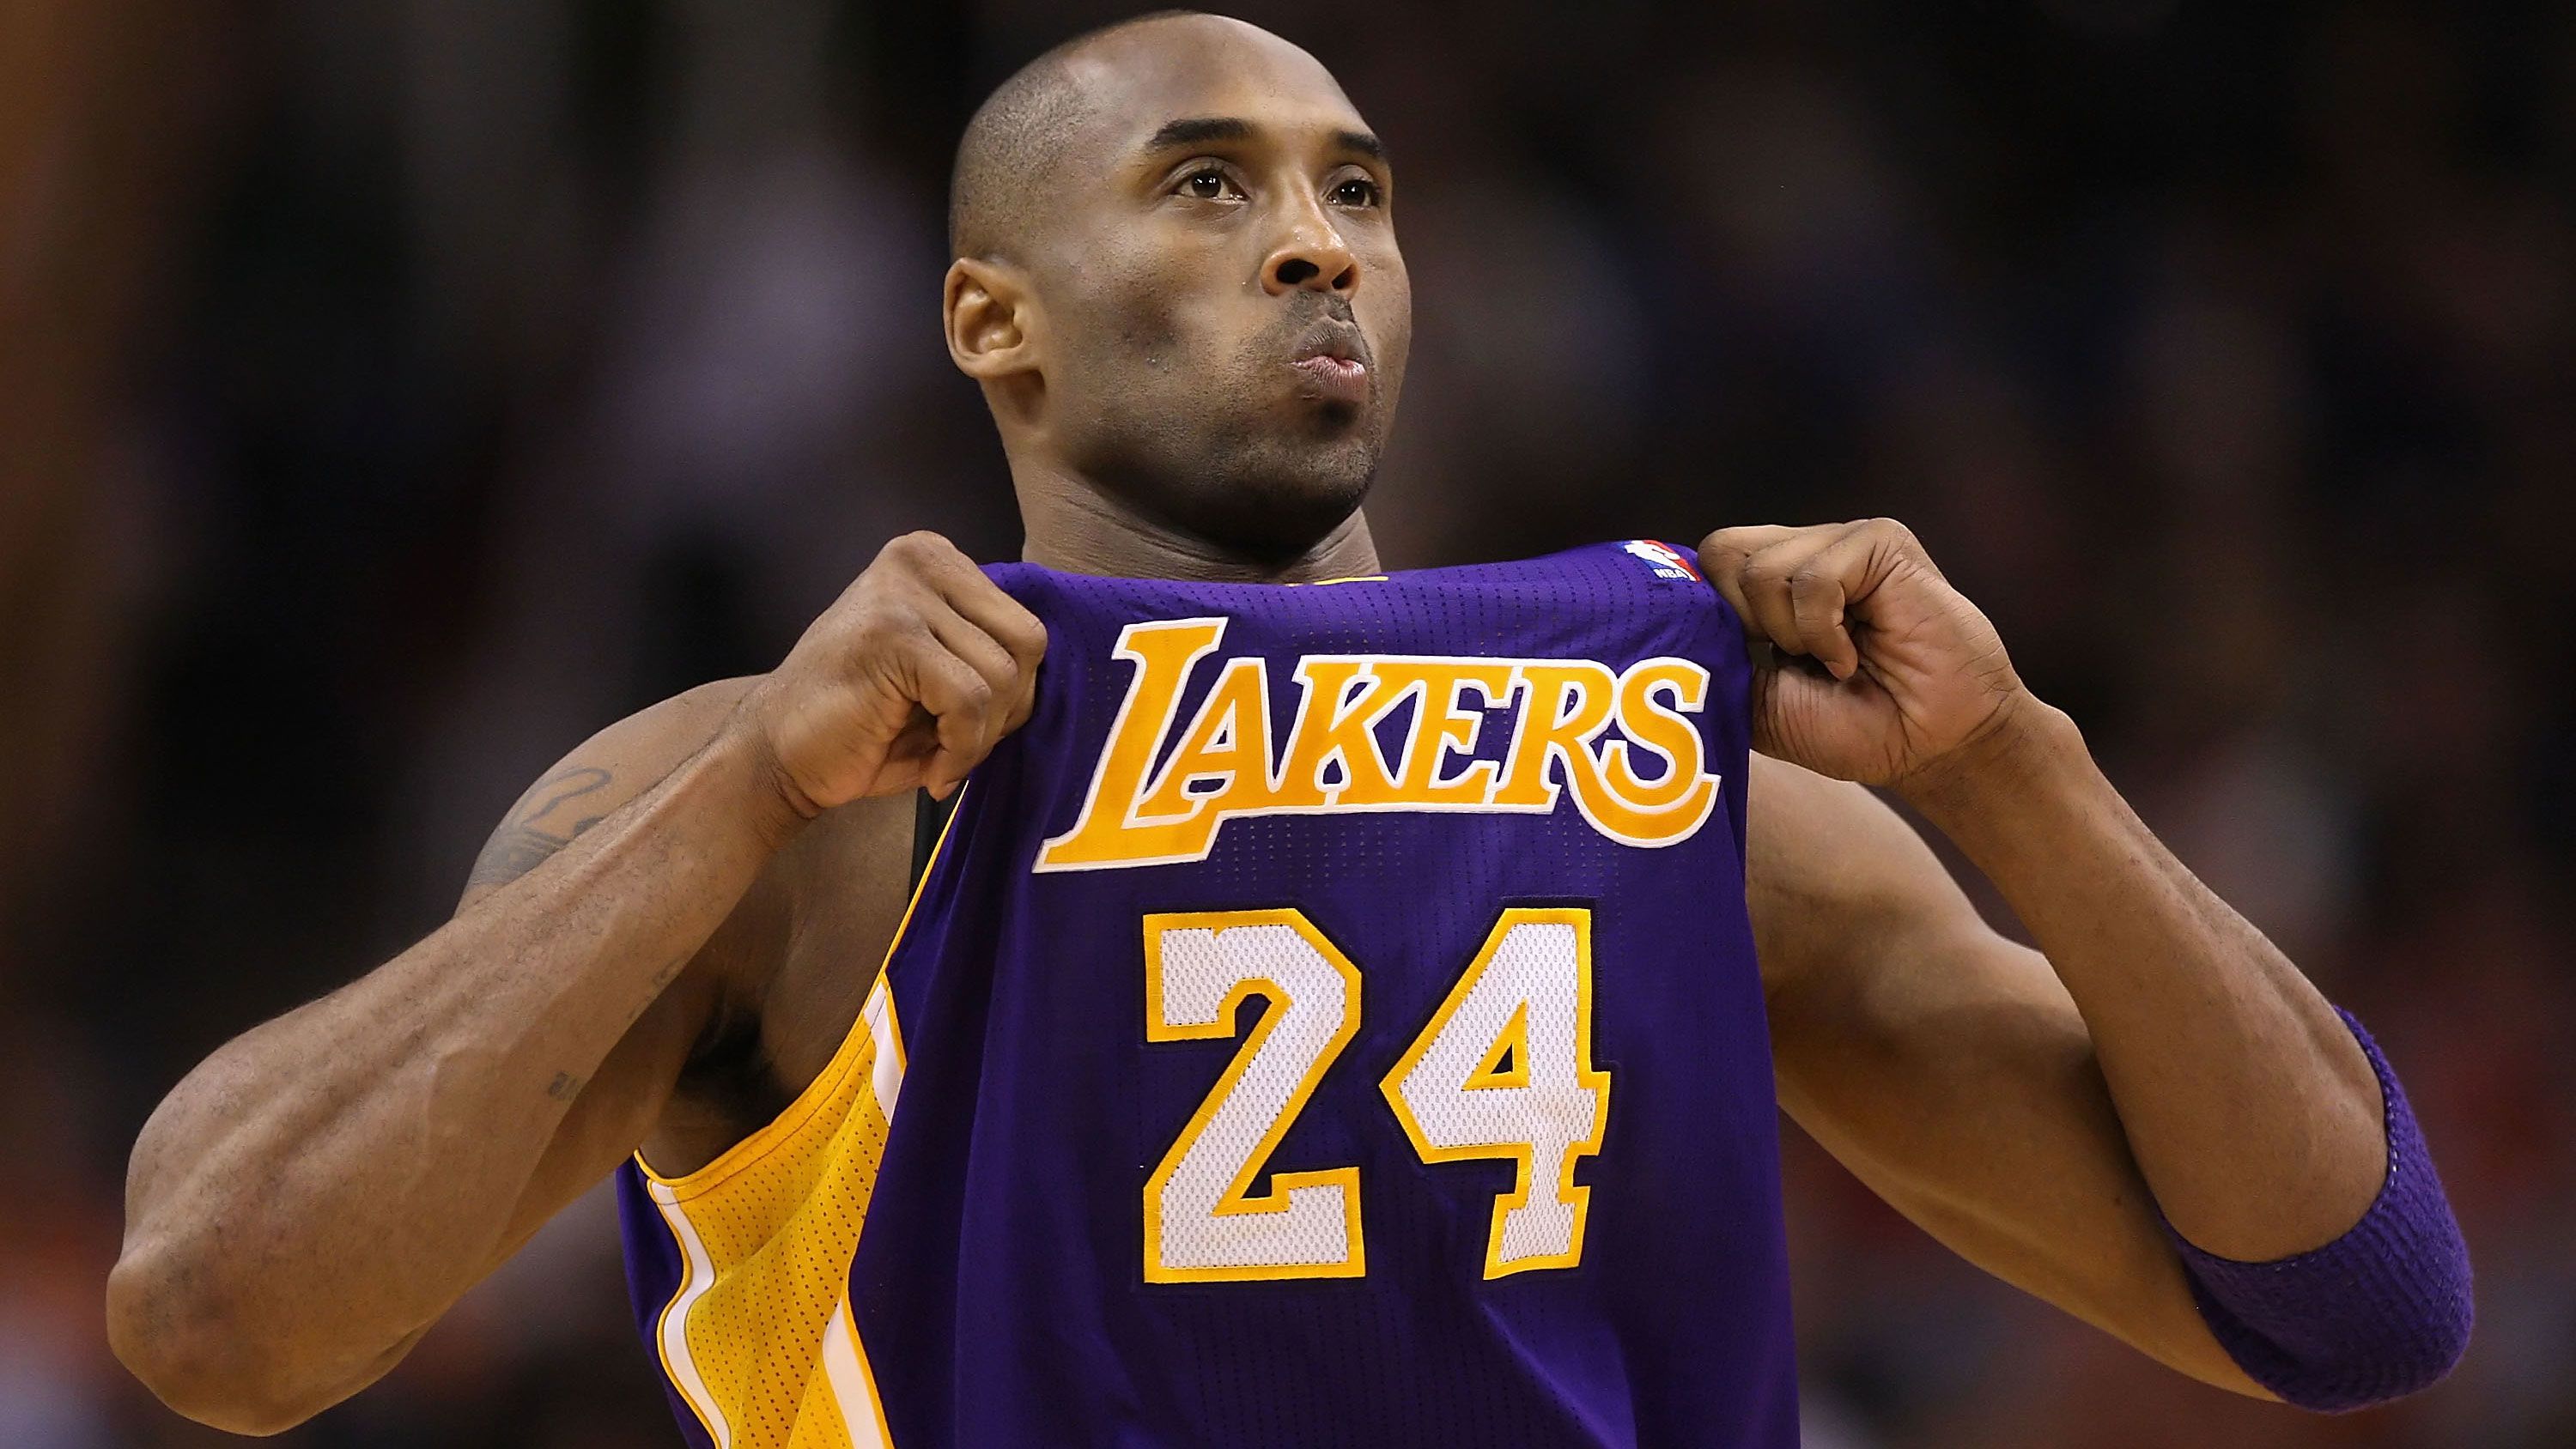 Mamba Out: Remembering the life and legacy of Kobe Bryant